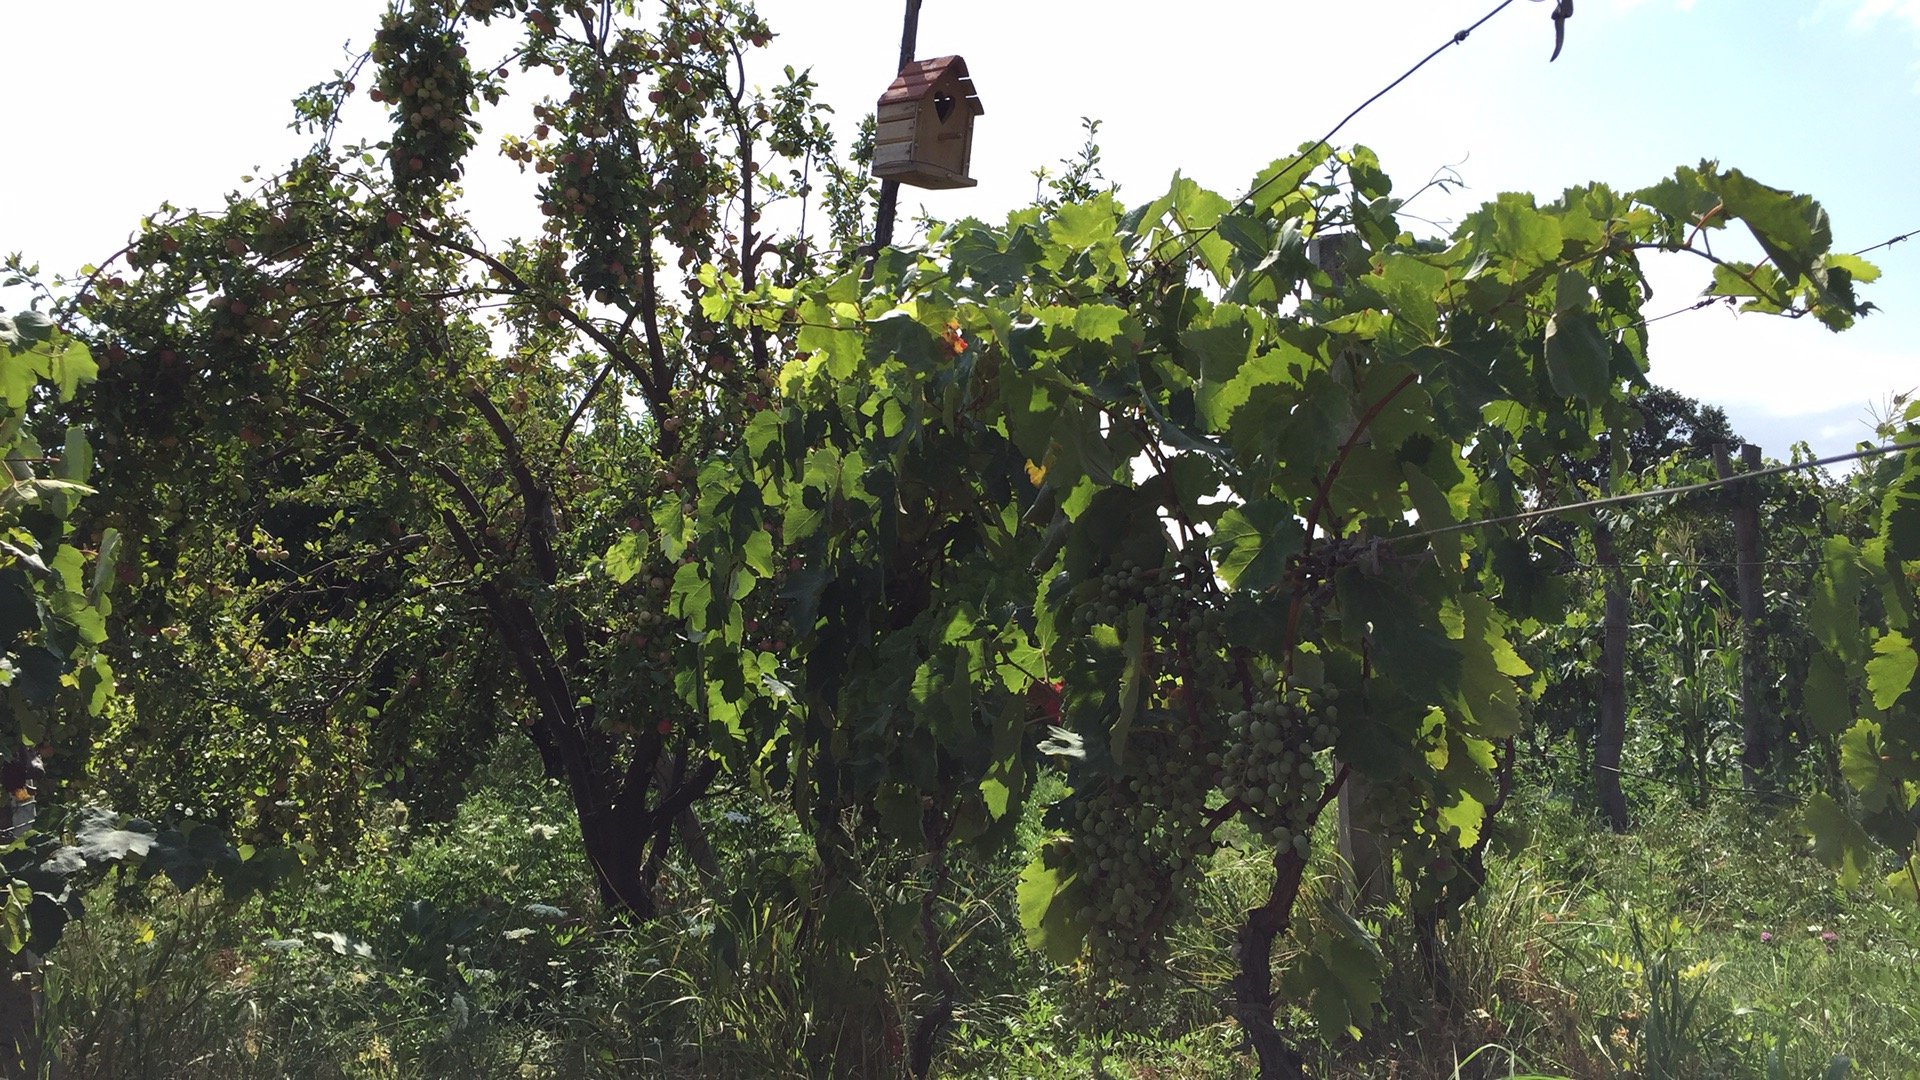 We treat environment and welcome birds and pests in our vineyard